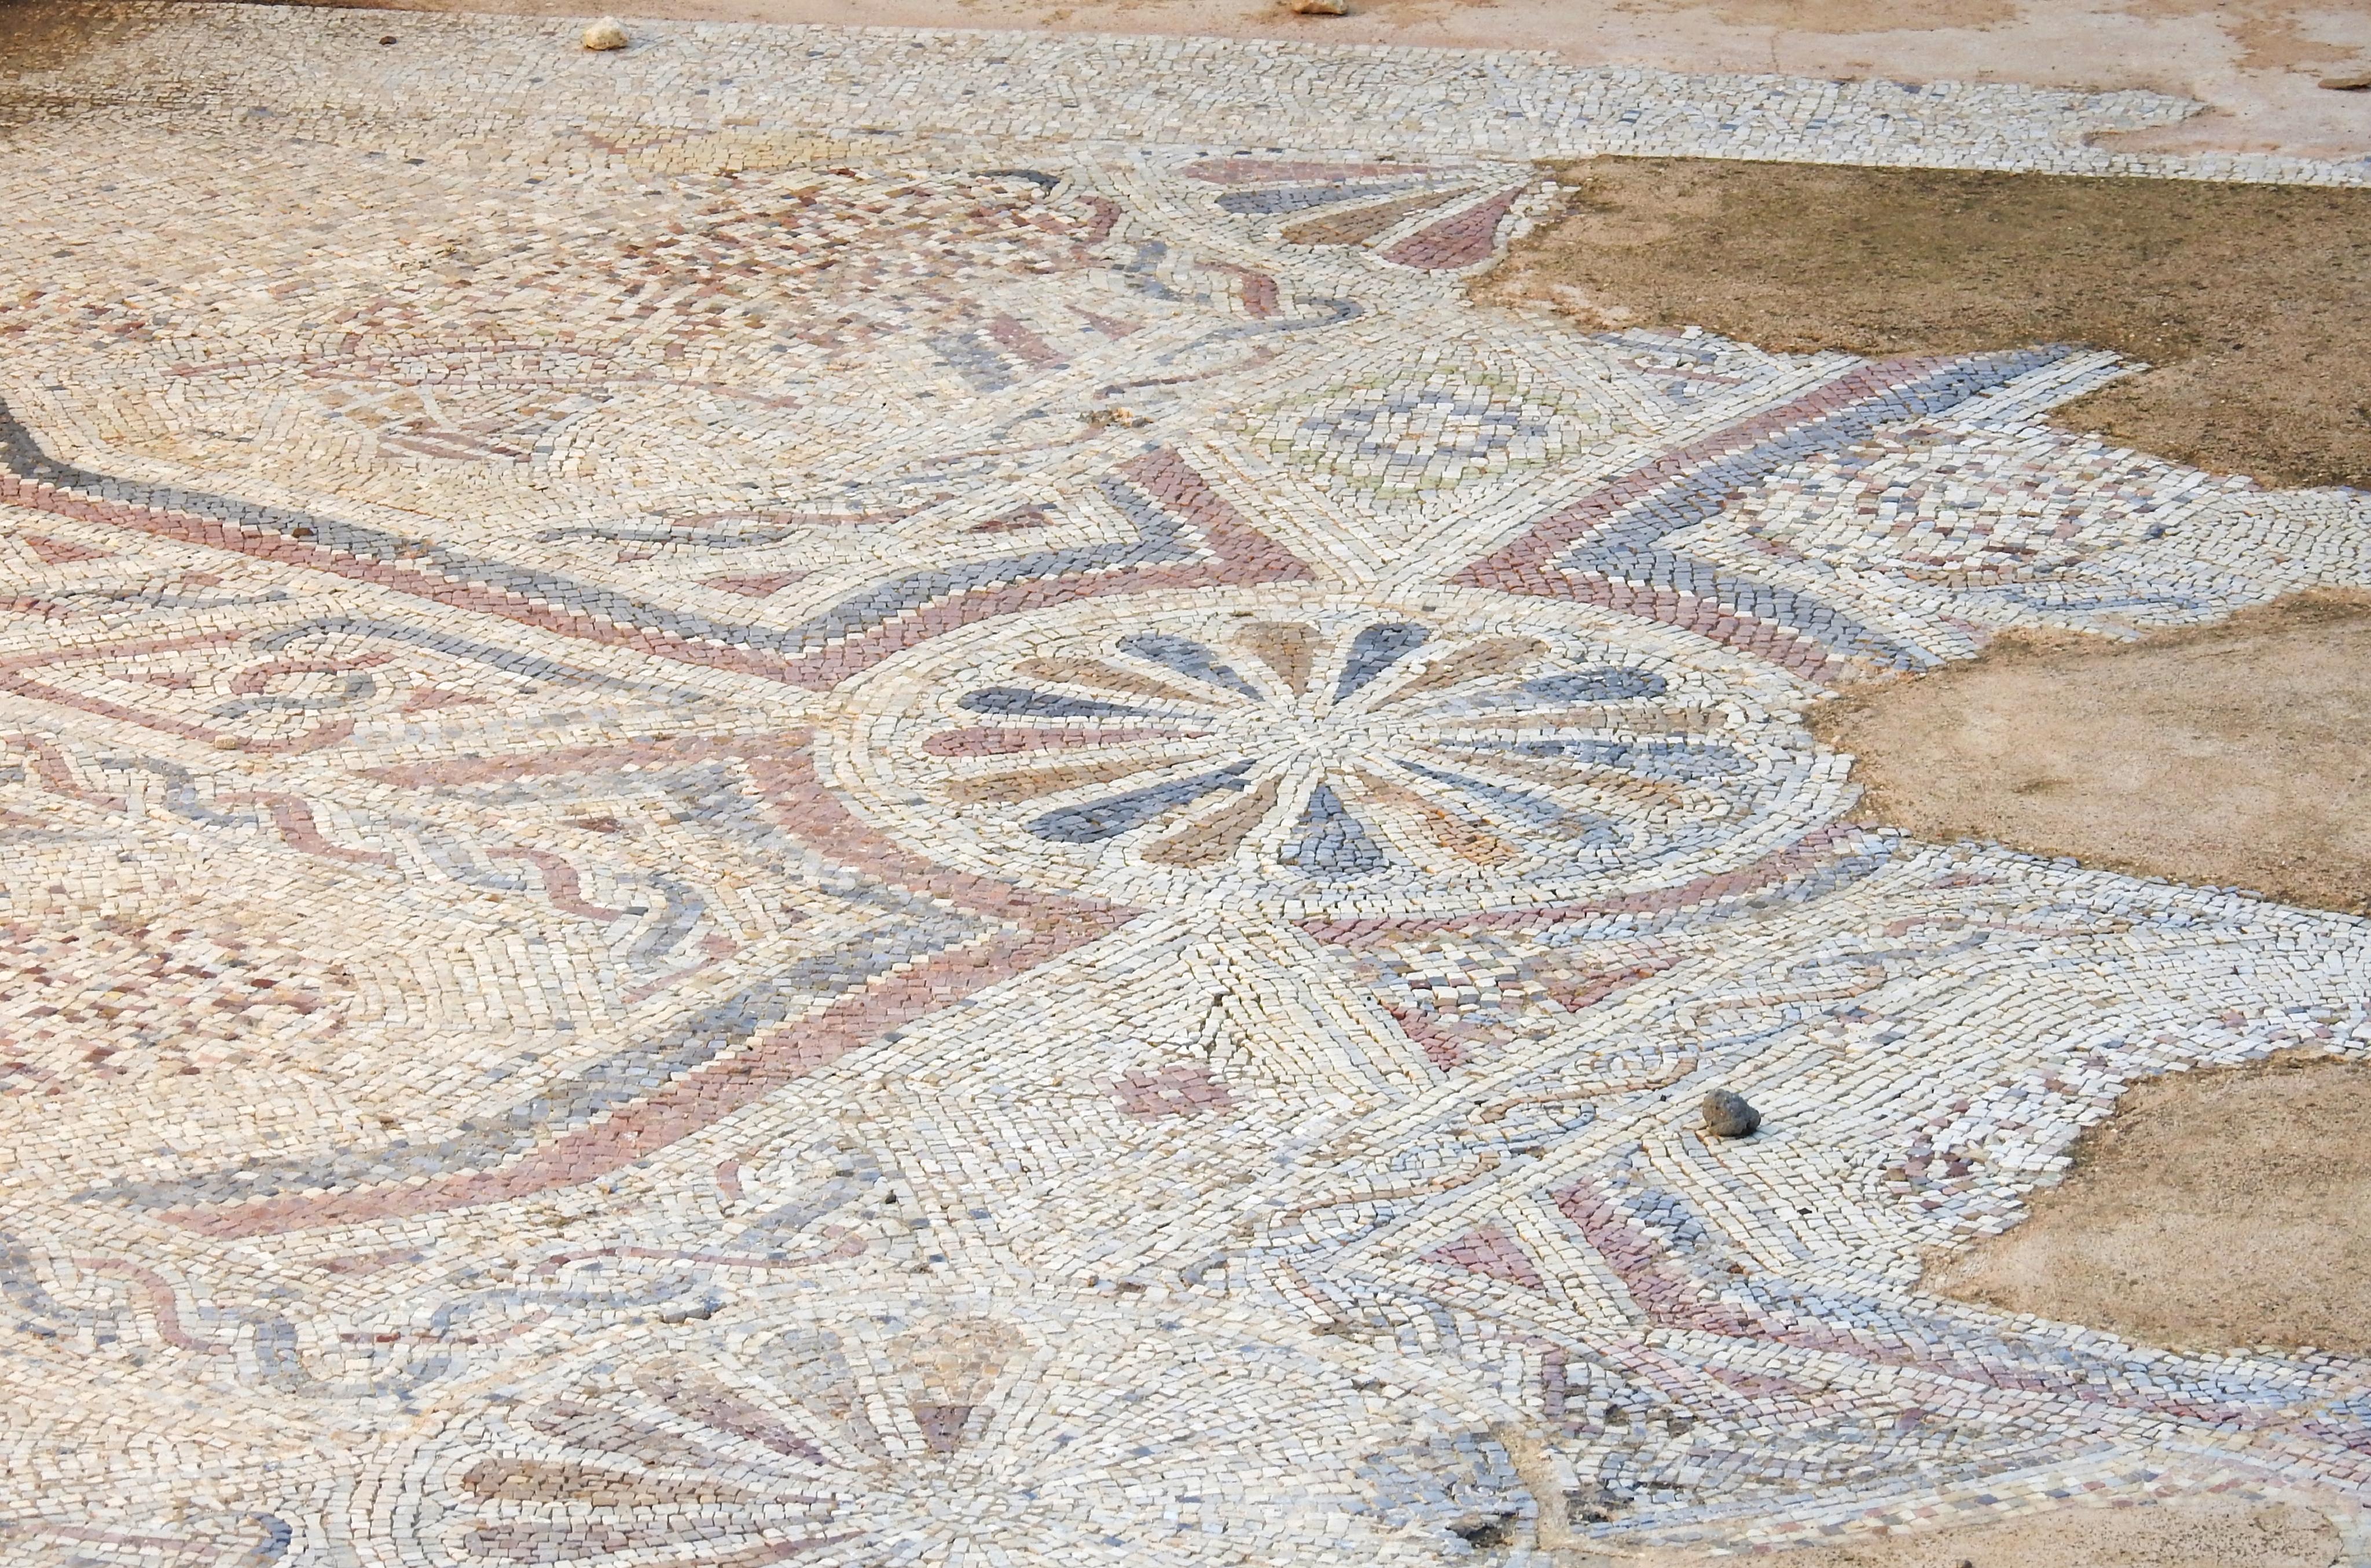 Detail of the Byzantine mosaic floor